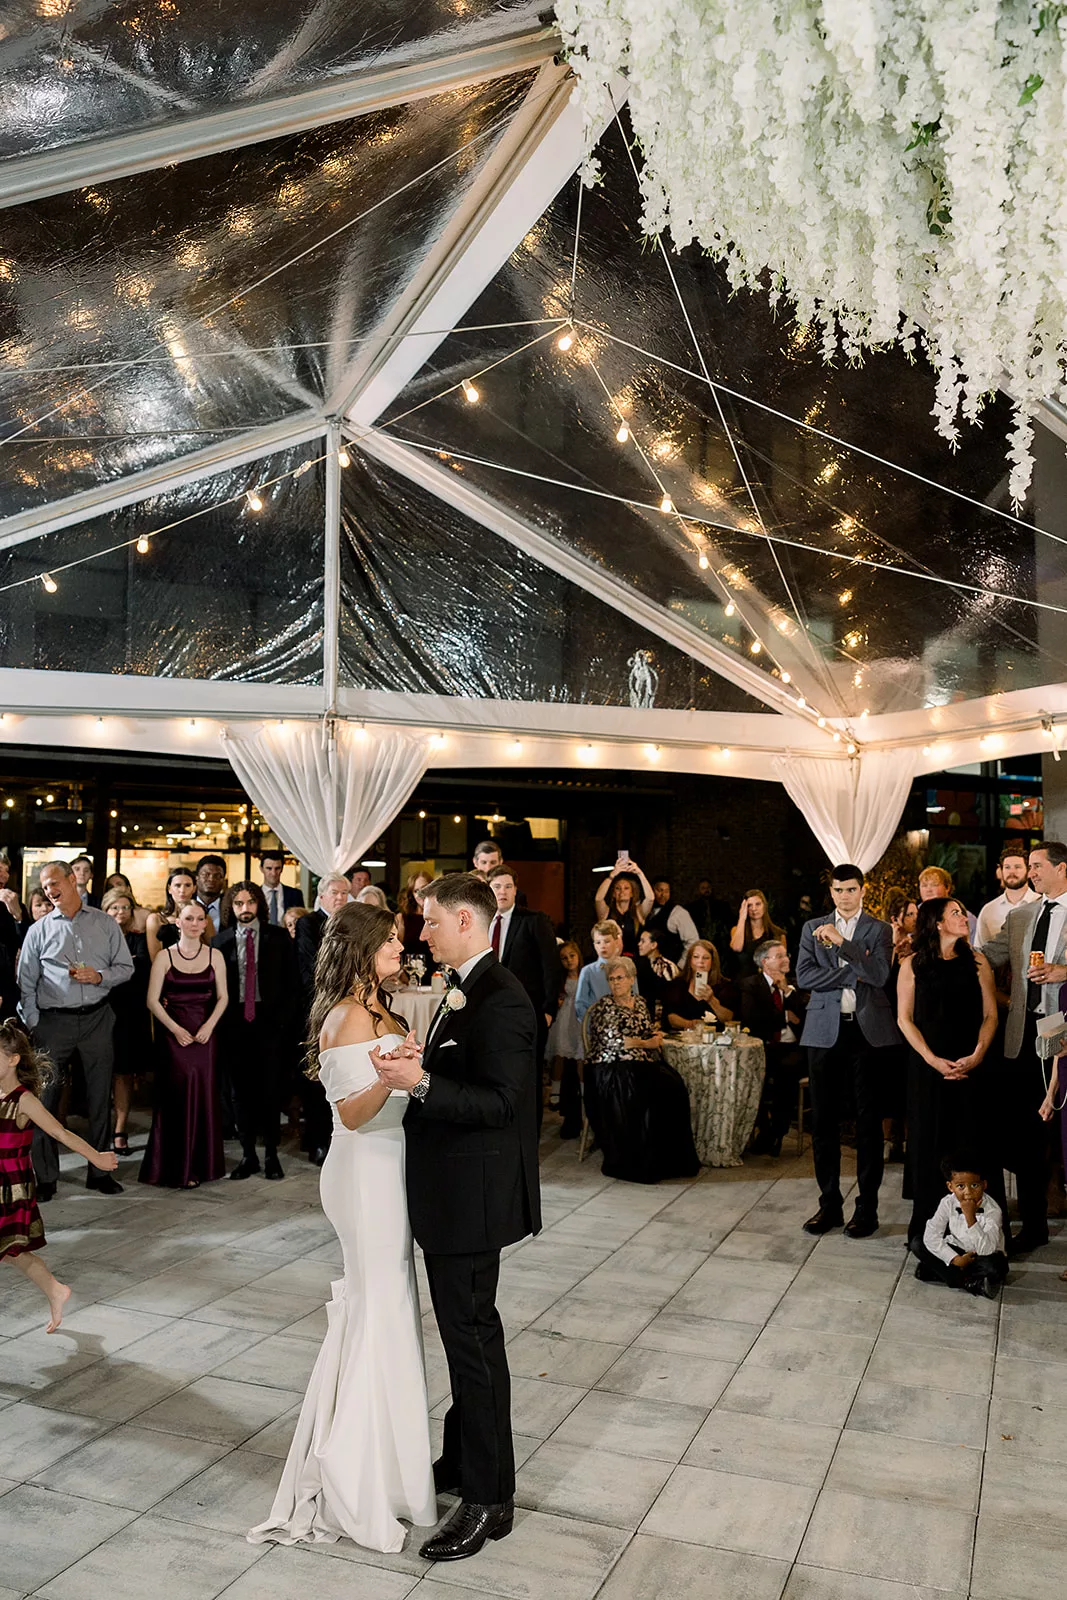 Newlyweds dance under a tent in front of their guests at The Chapel Athens